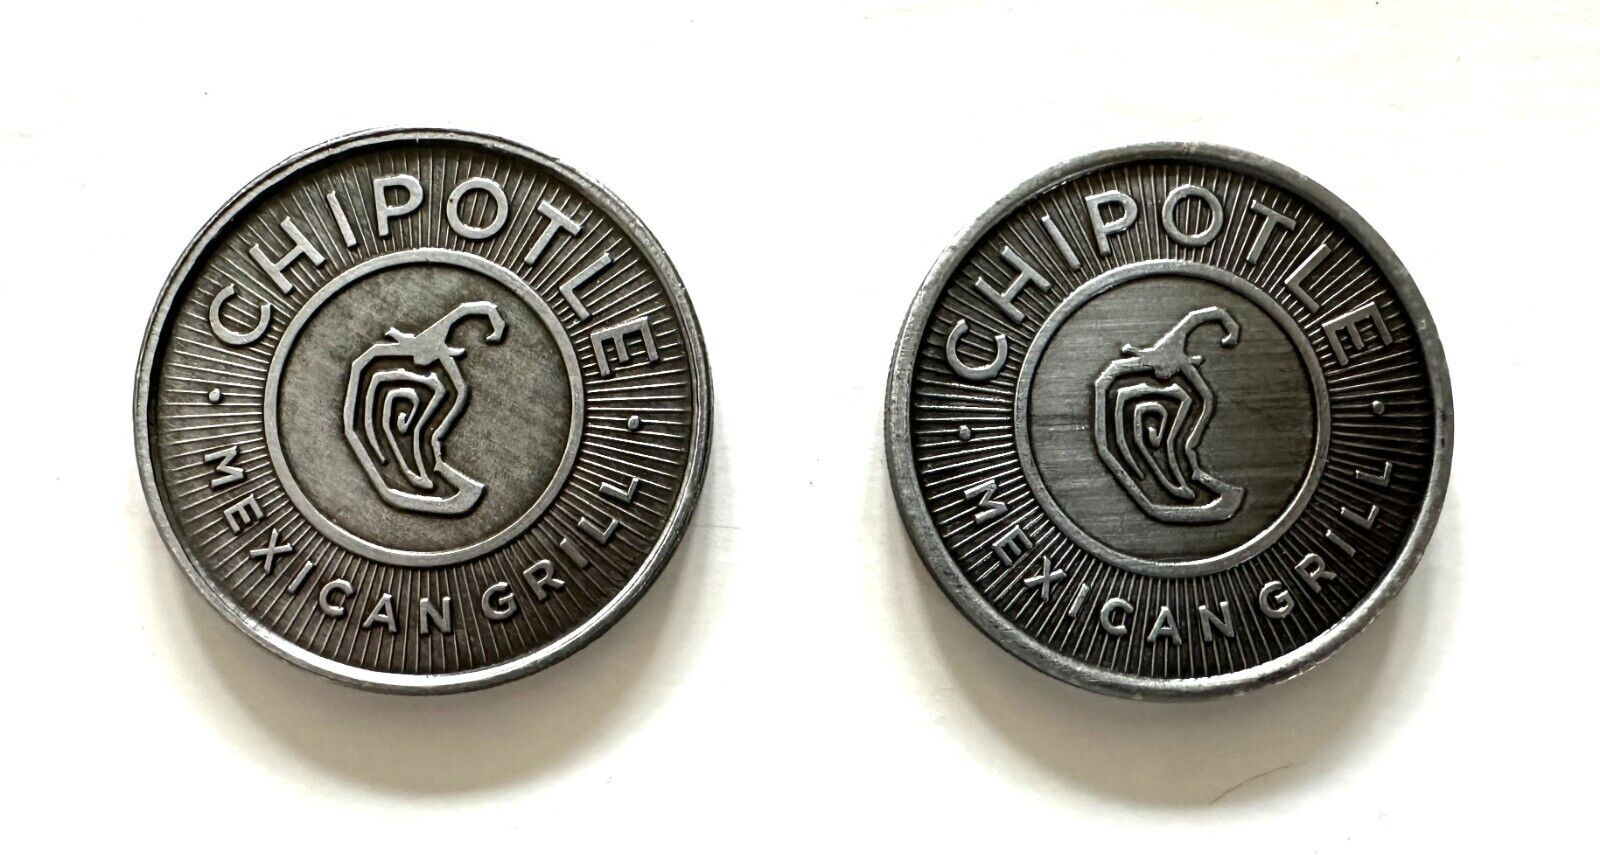 2012 & 2013 Metal CHIPOTLE Mexican Grill Coins /Tokens (exchange for 2 Burritos)